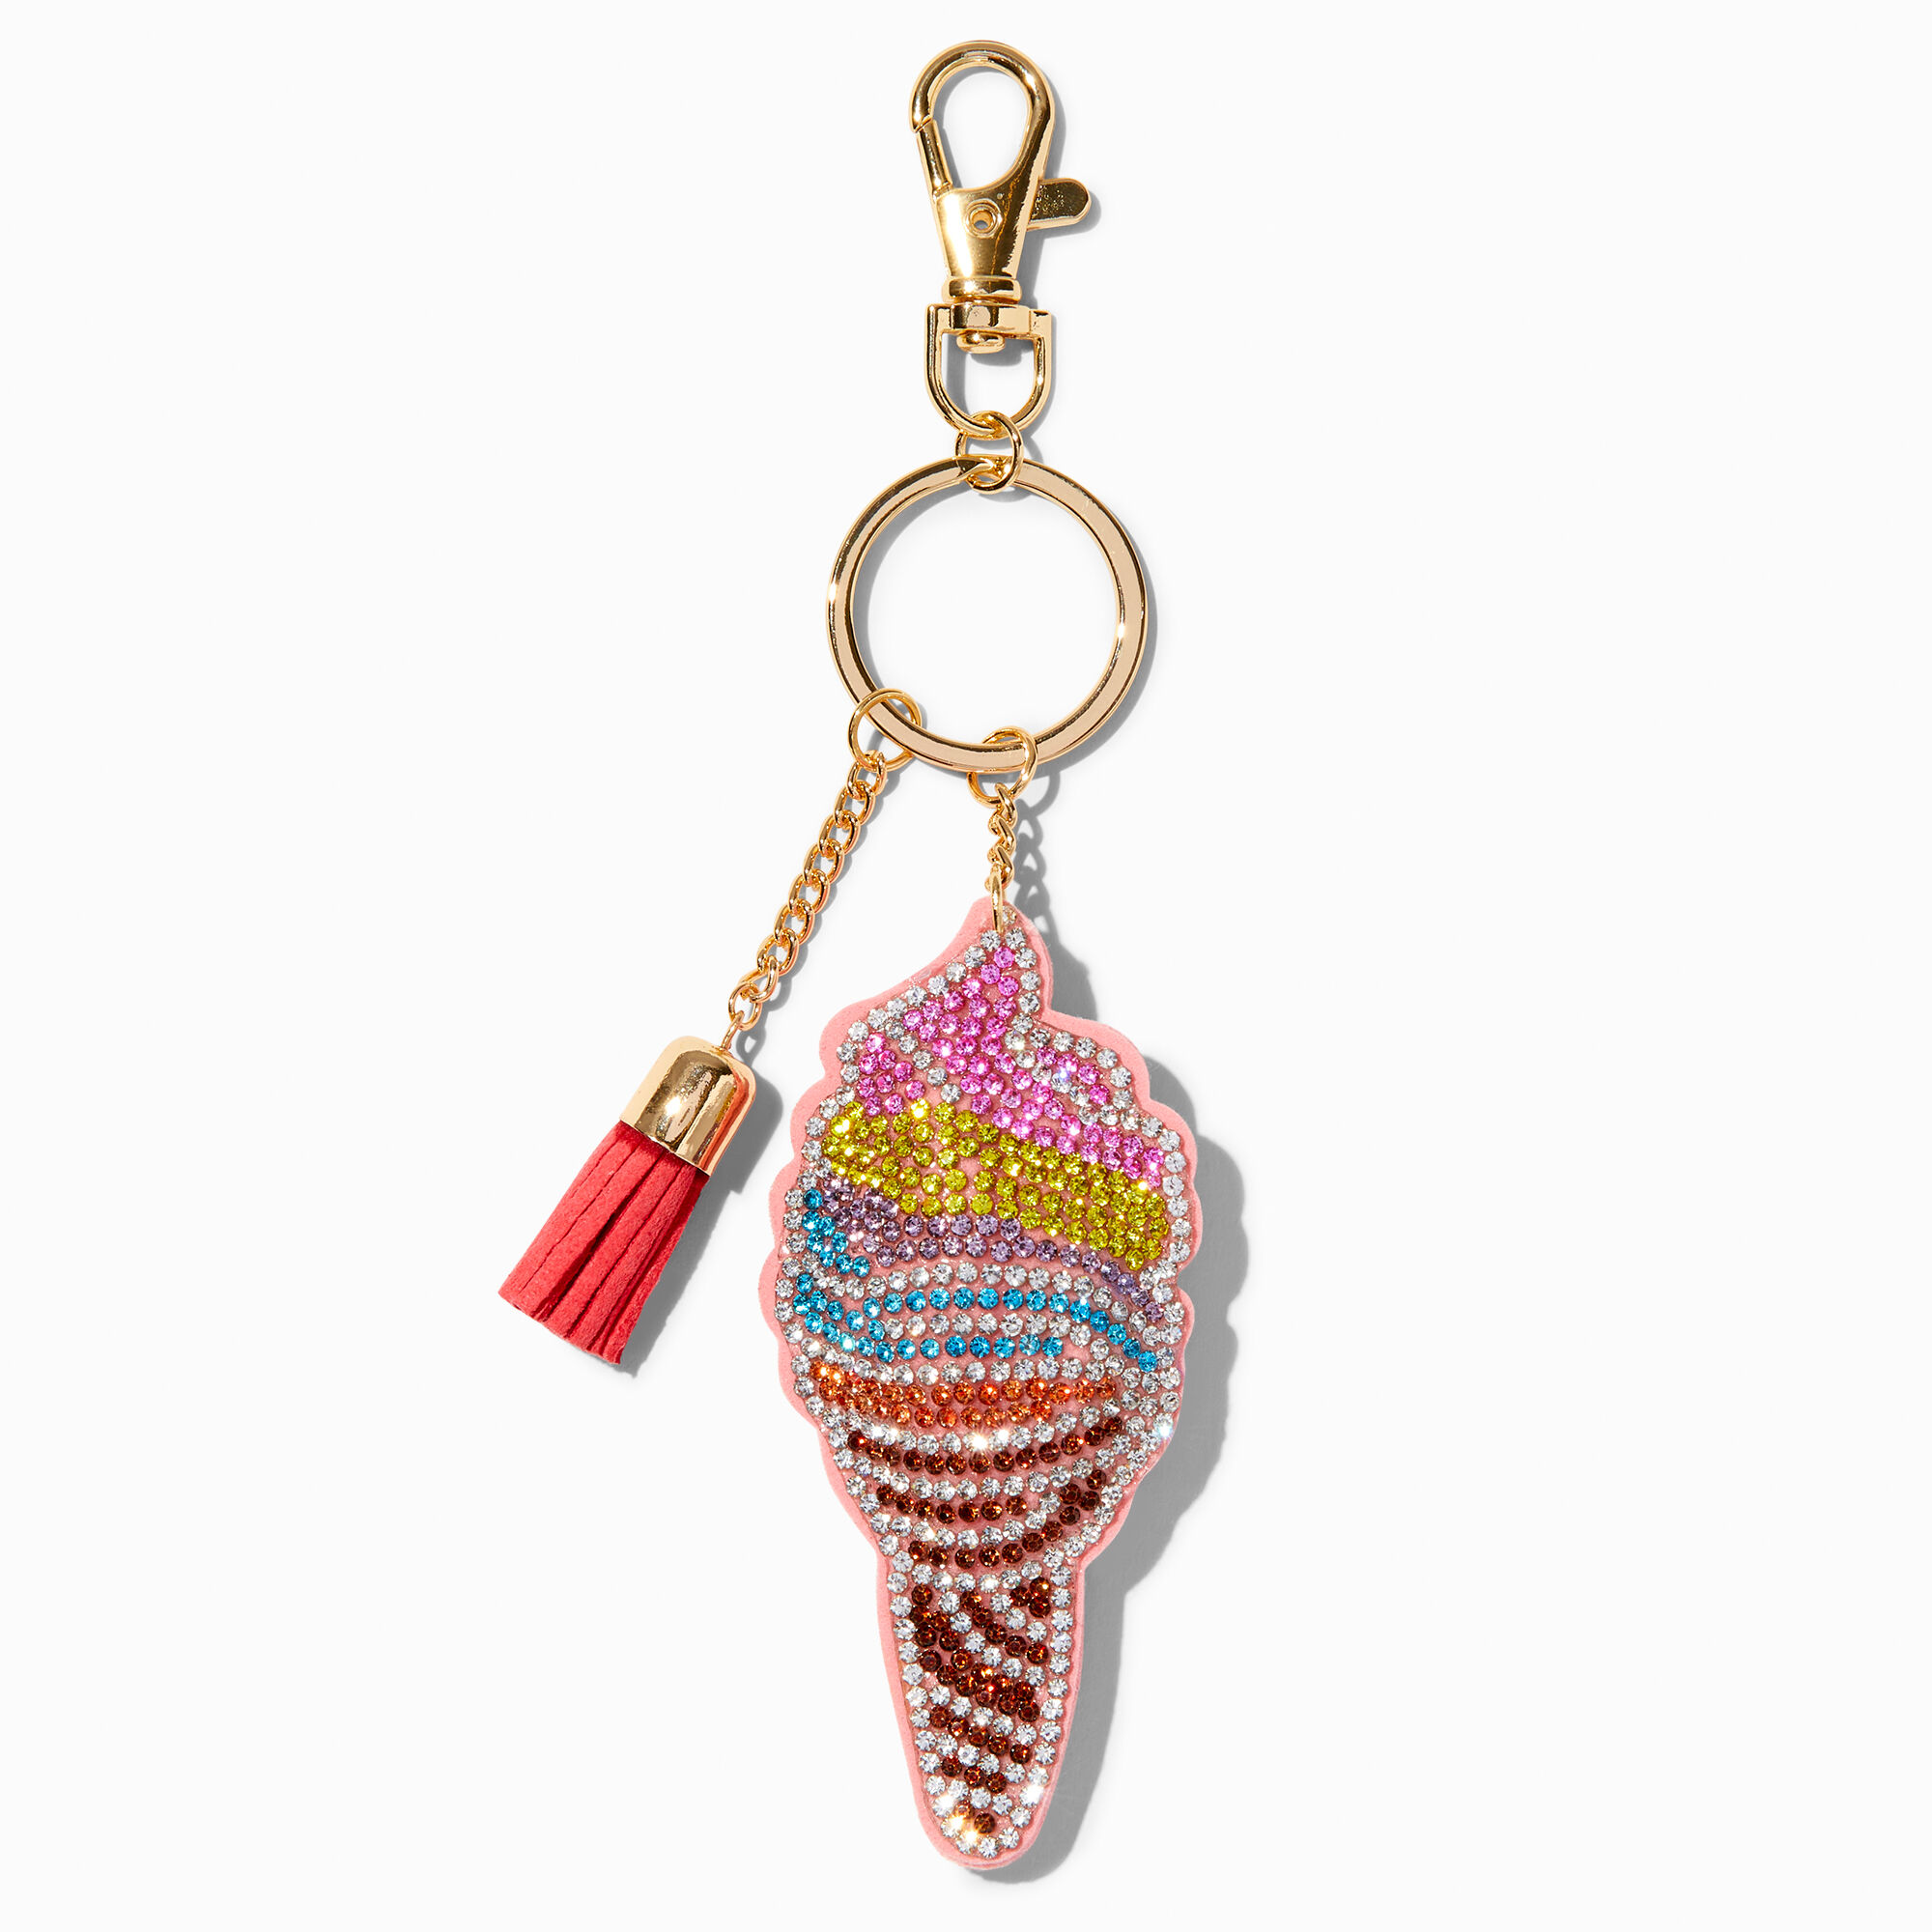 View Claires Rhinestone Ice Cream Cone Keyring Gold information